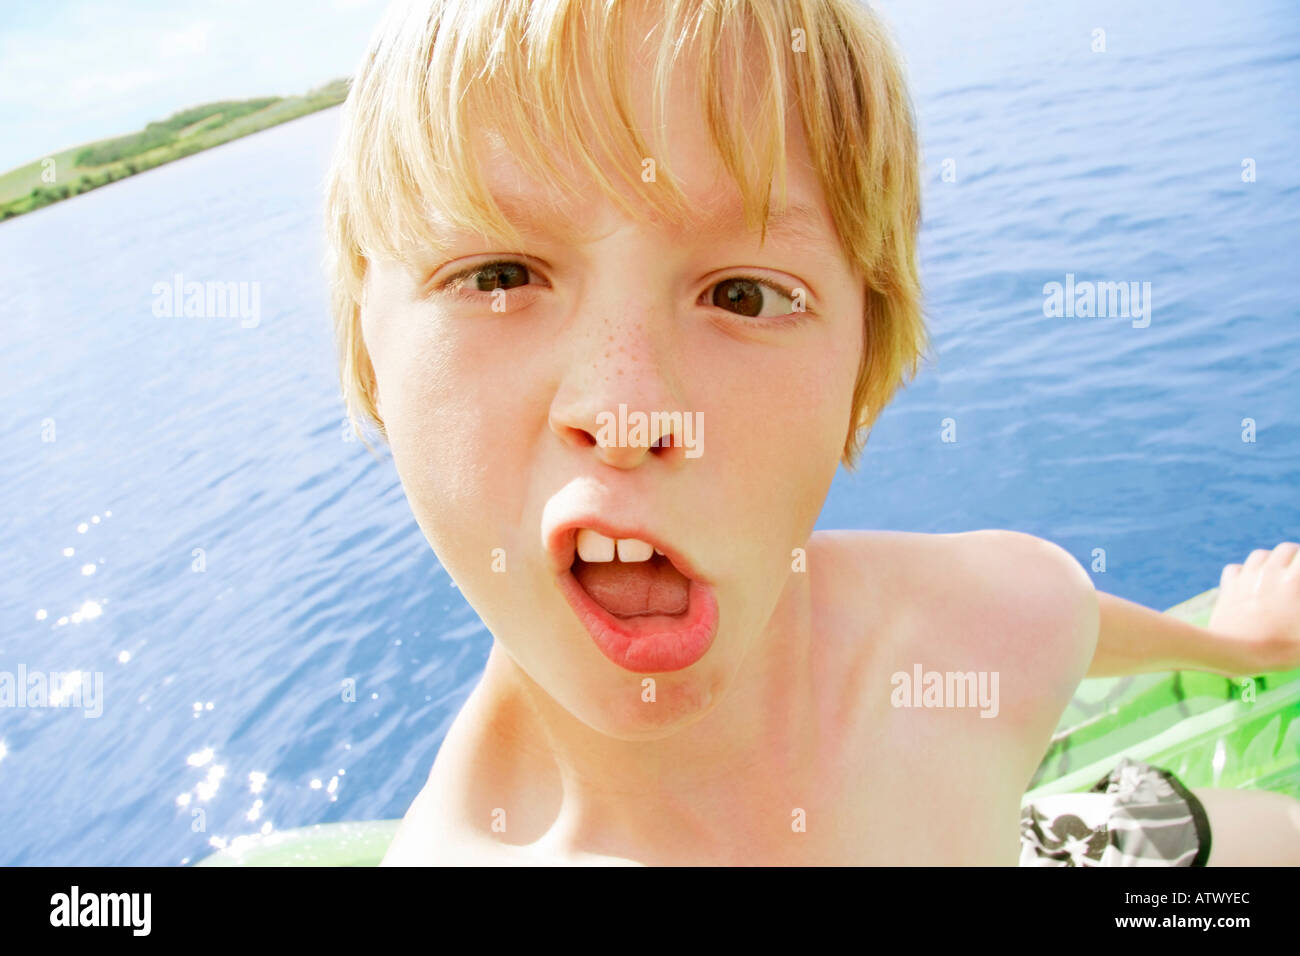 A young boy making a funny face Stock Photo